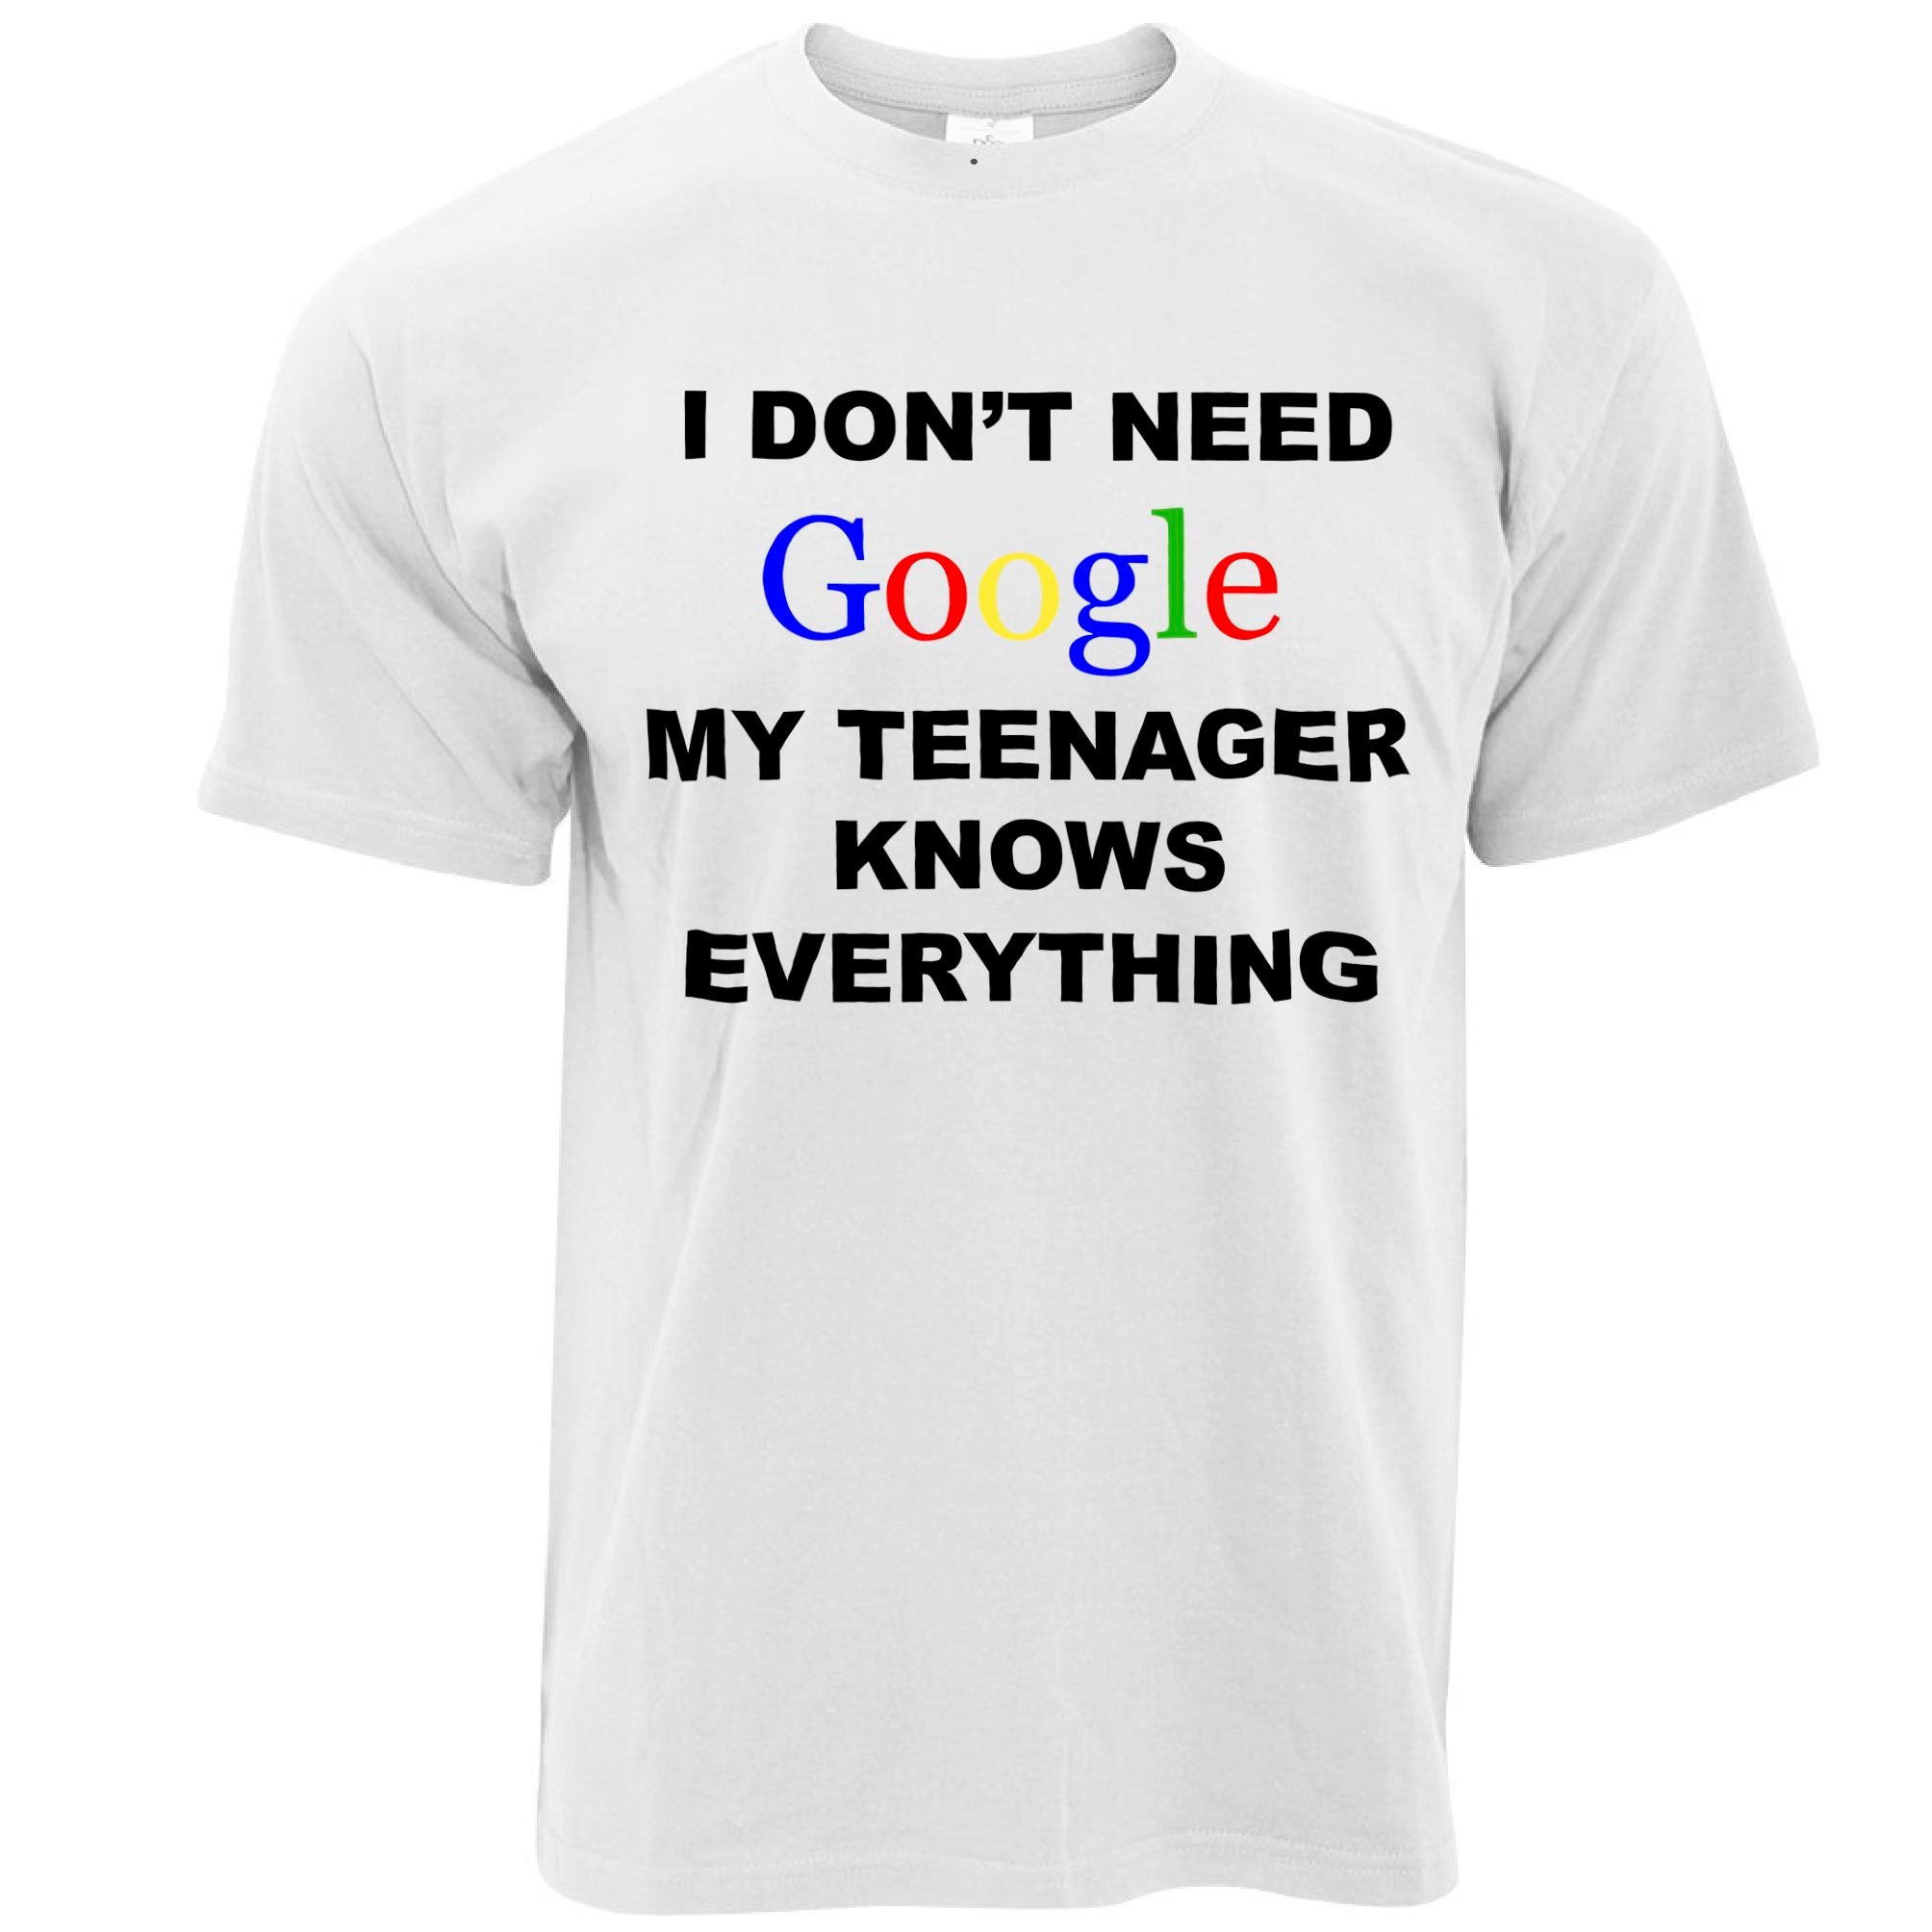 I Don't Need Google T Shirt Teenager Knows Everything